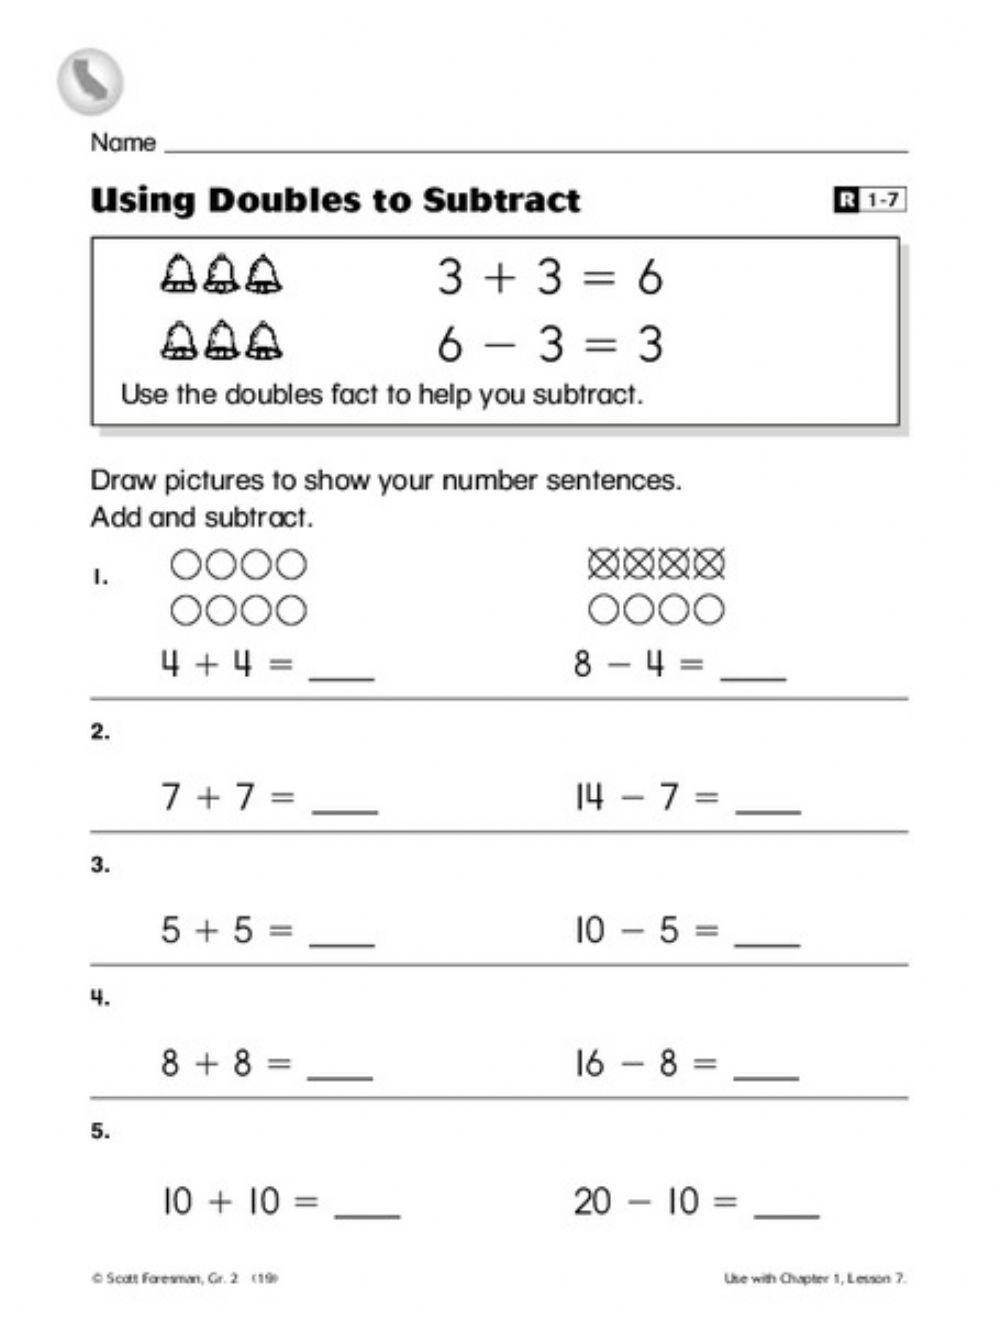 Use doubles to subtract